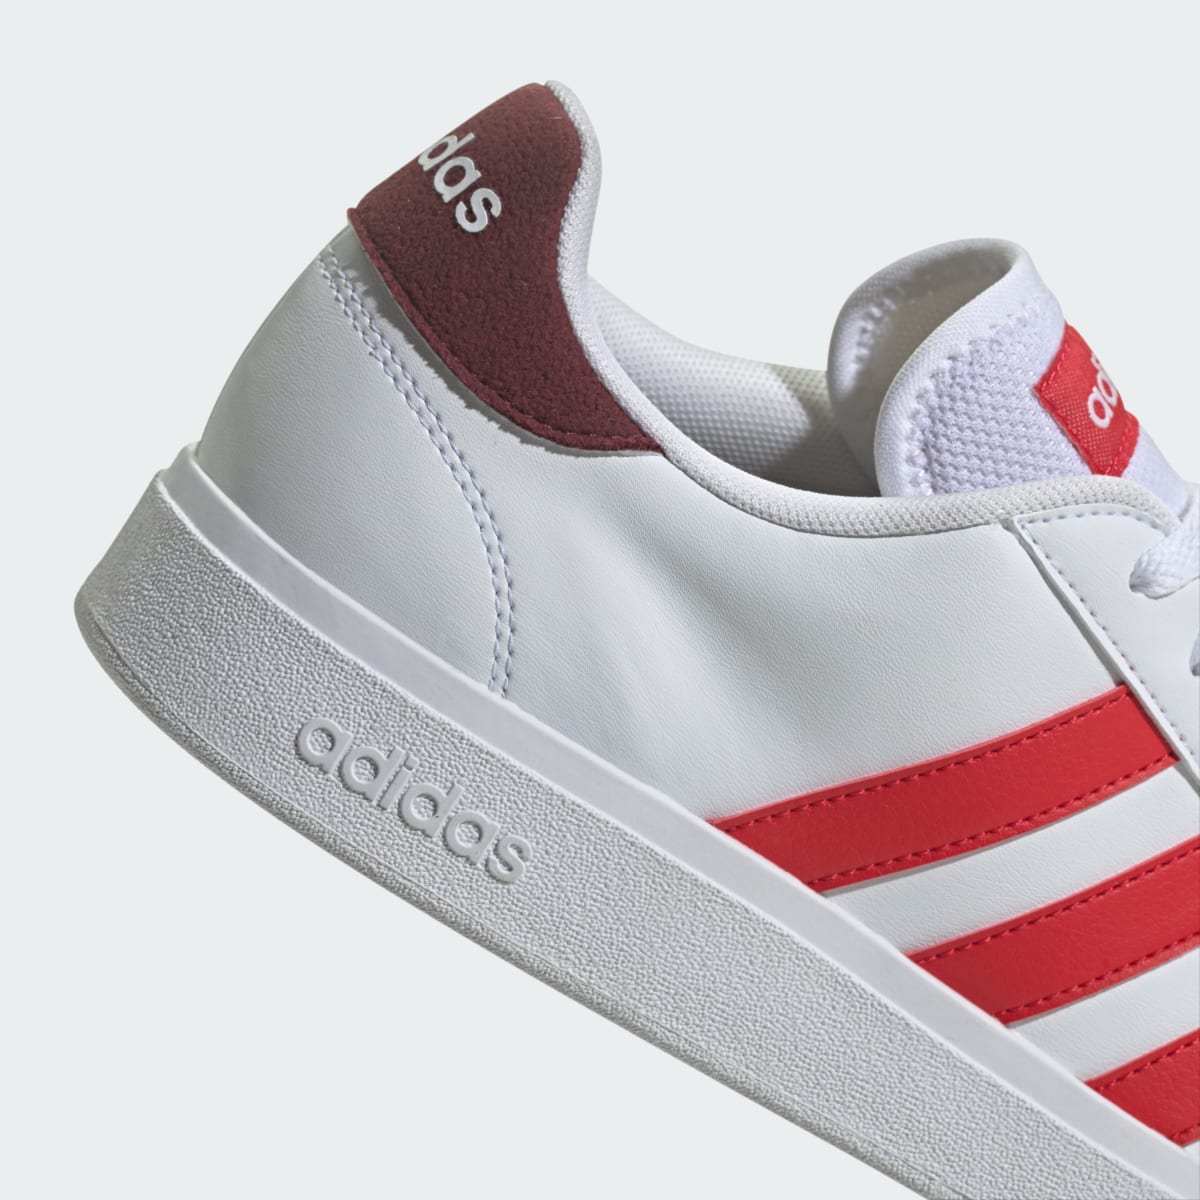 Adidas Tenis adidas Grand Court TD Lifestyle Court Casual. 9